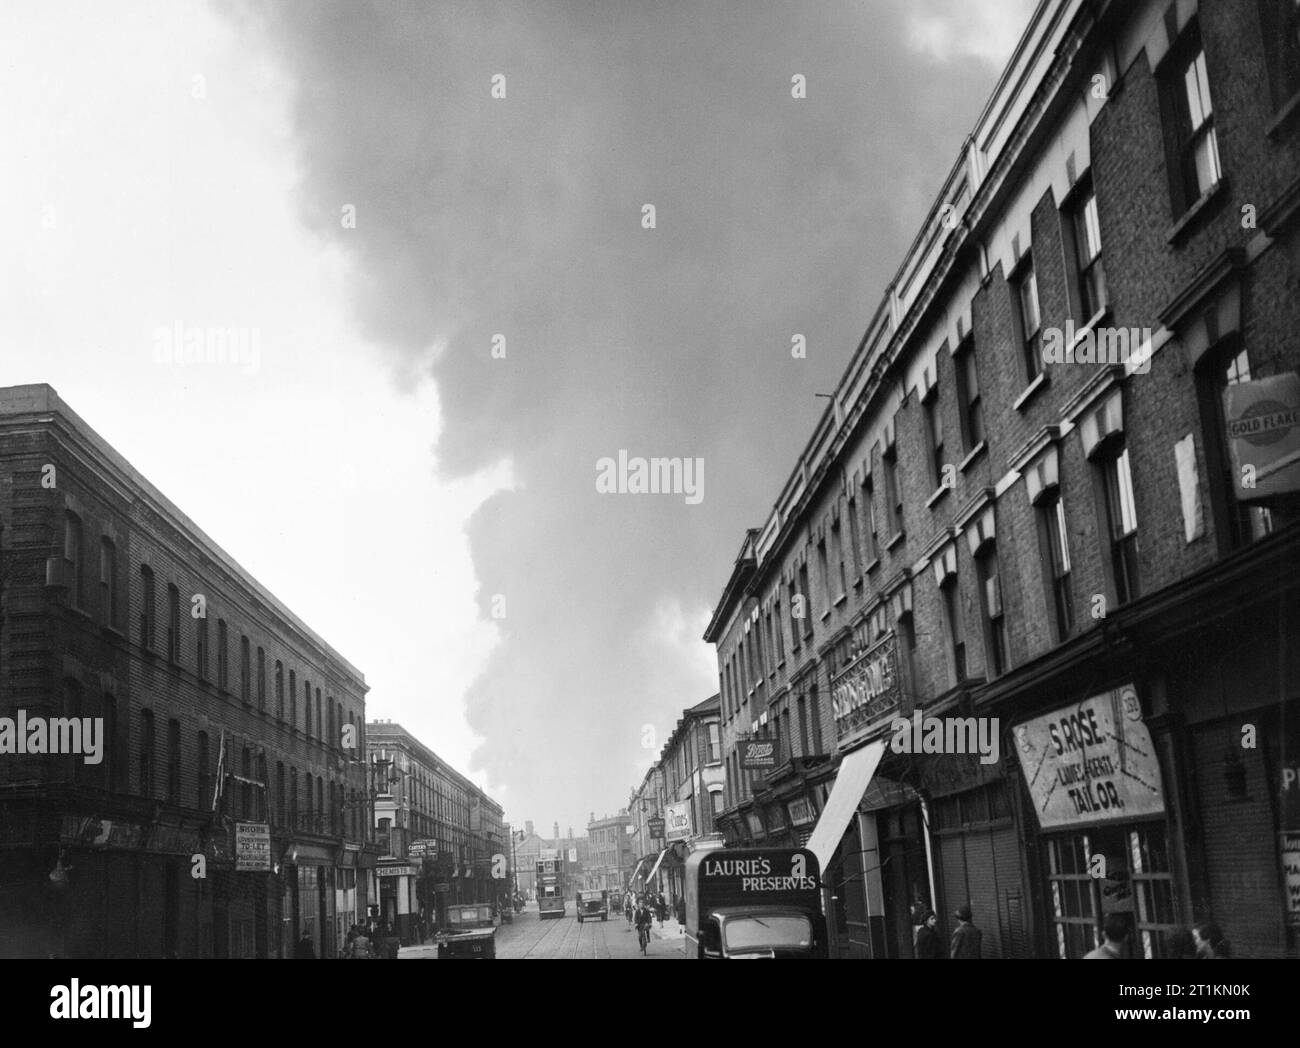 A cloud of smoke rises in the distance after a V1 Flying Bomb lands in the Norwood area of London during 1944. A cloud of smoke rises in the distance after a V1 attack in the Norwood area of London. Life appear to be continuing as normal, however, as this busy high street scene illustrates. At the far end of the street (possibly Norwood High Street or Lower Addiscombe Road), a number 34 tram can just be seen. On the right hand side of the street, shops include 'Old Times Furnishing Company', Boots the Chemist and S Rose's tailor's shop (at number 252). A van delivering 'Laurie's Preserves' can Stock Photo